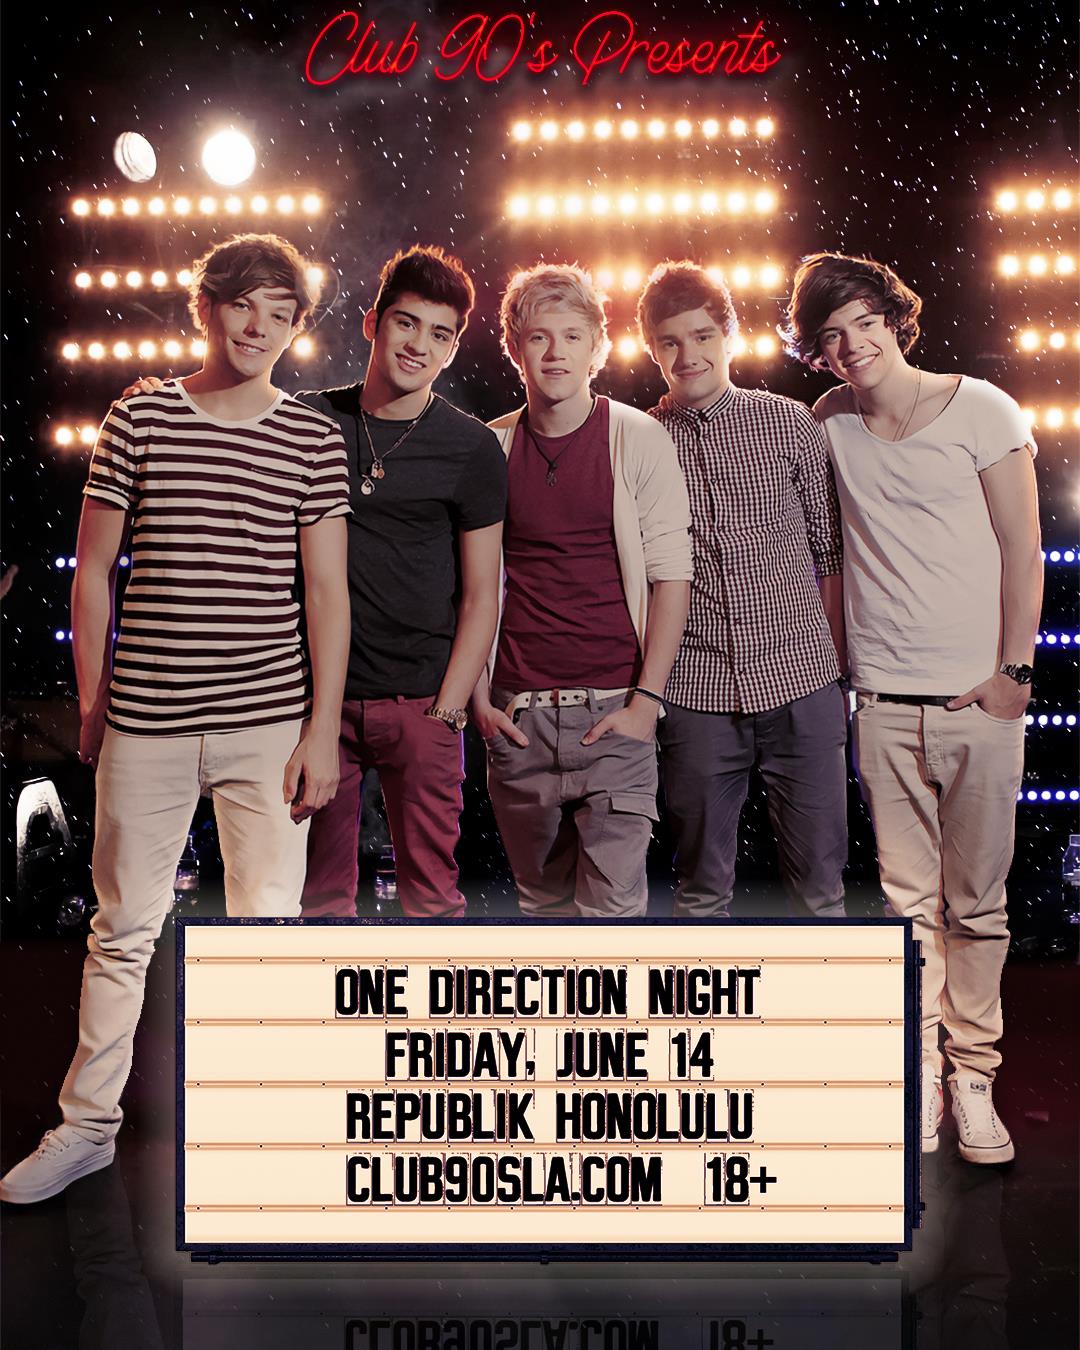 Club 90's Presents: One Direction Night